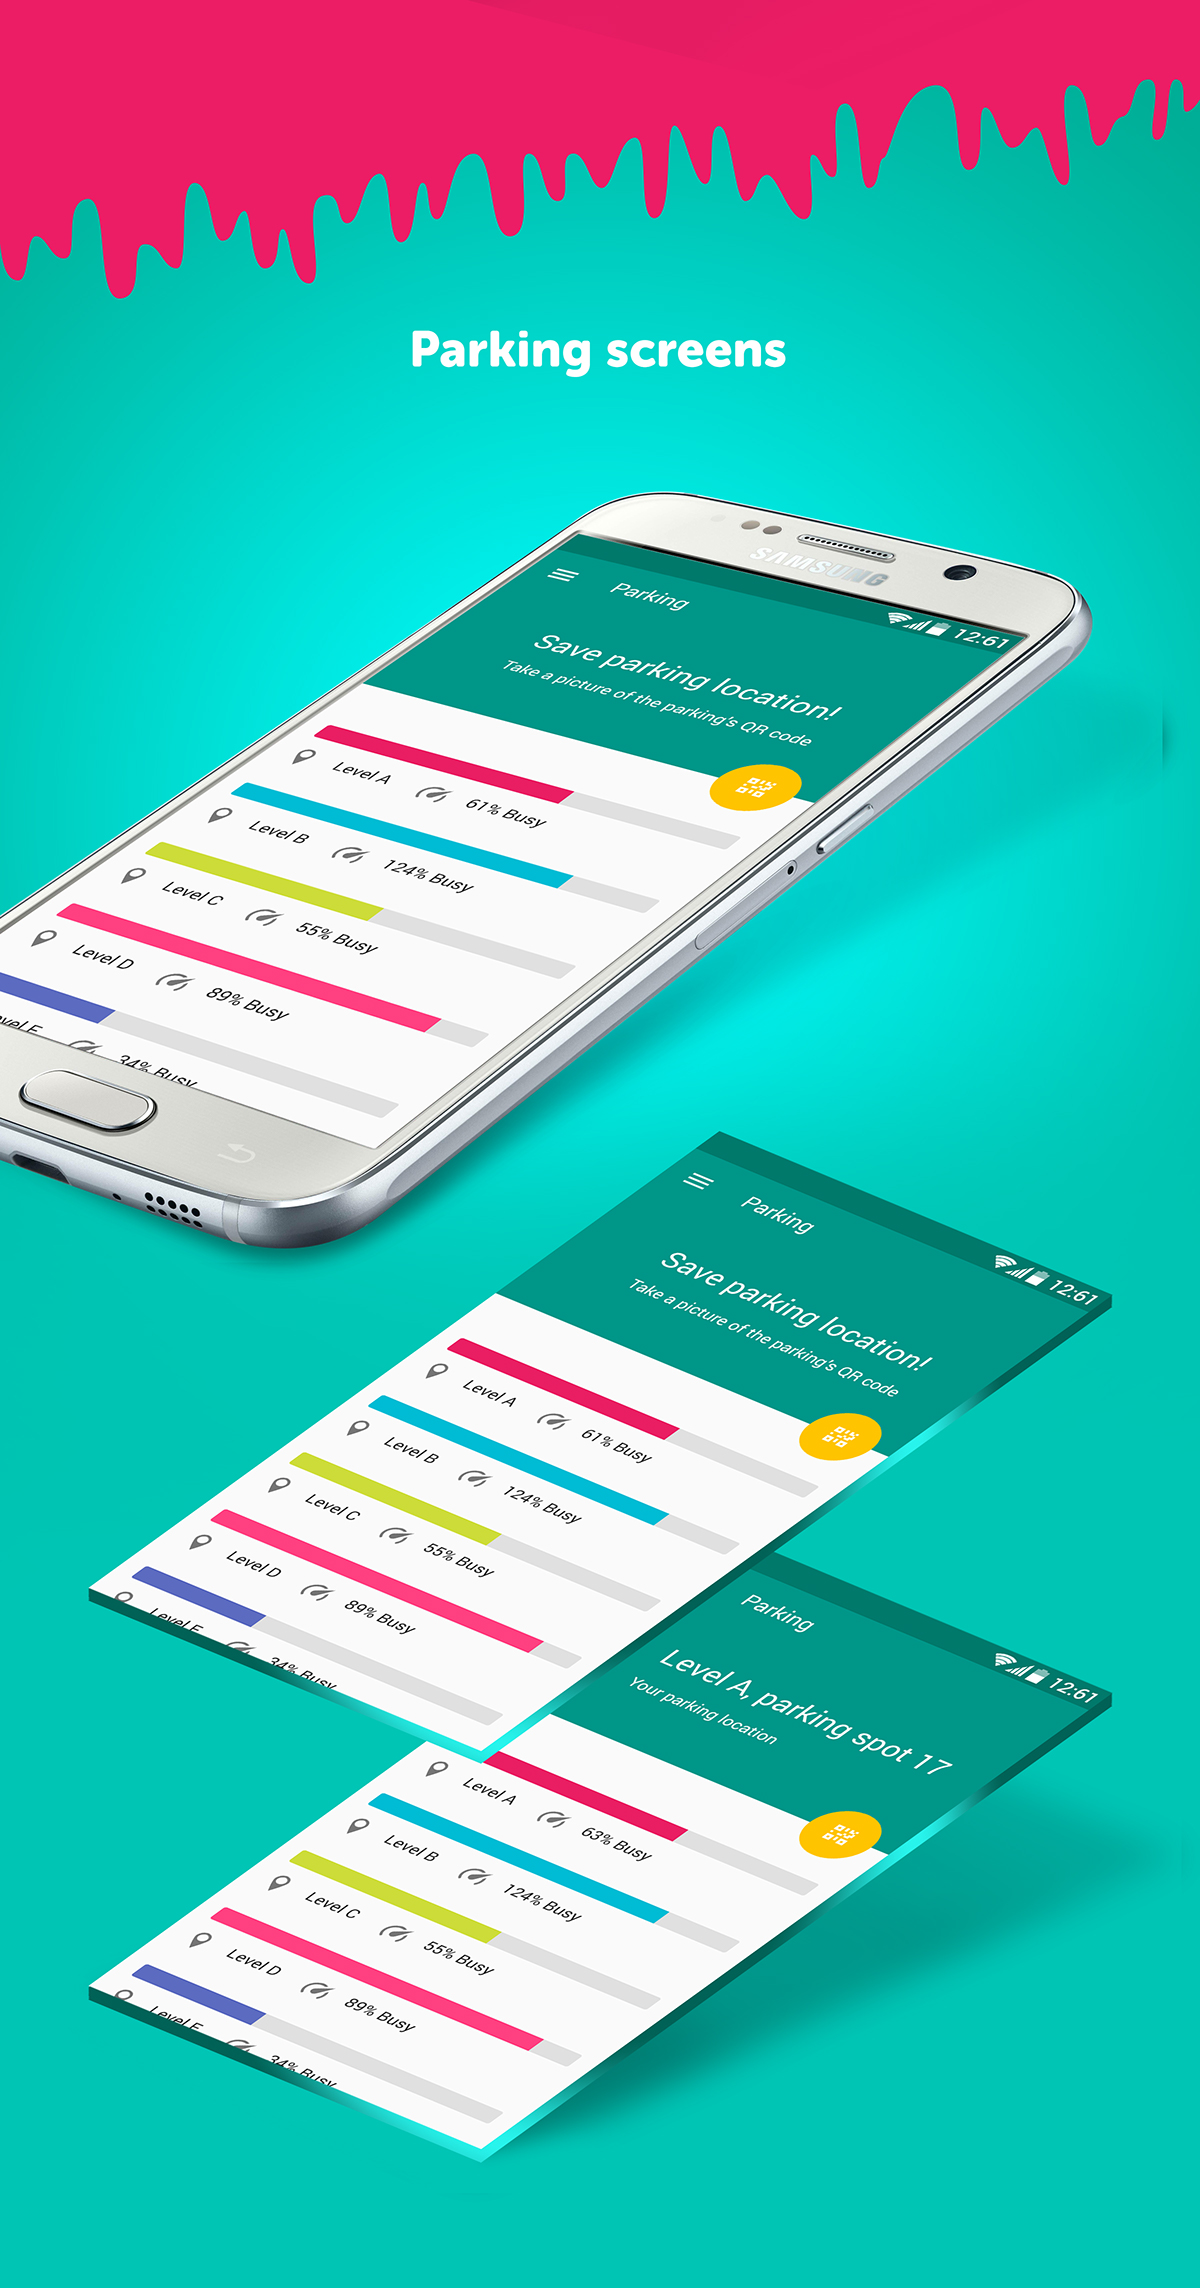 material design android UI ux app app design material apps colors Icon shopping center map taxi offers parking